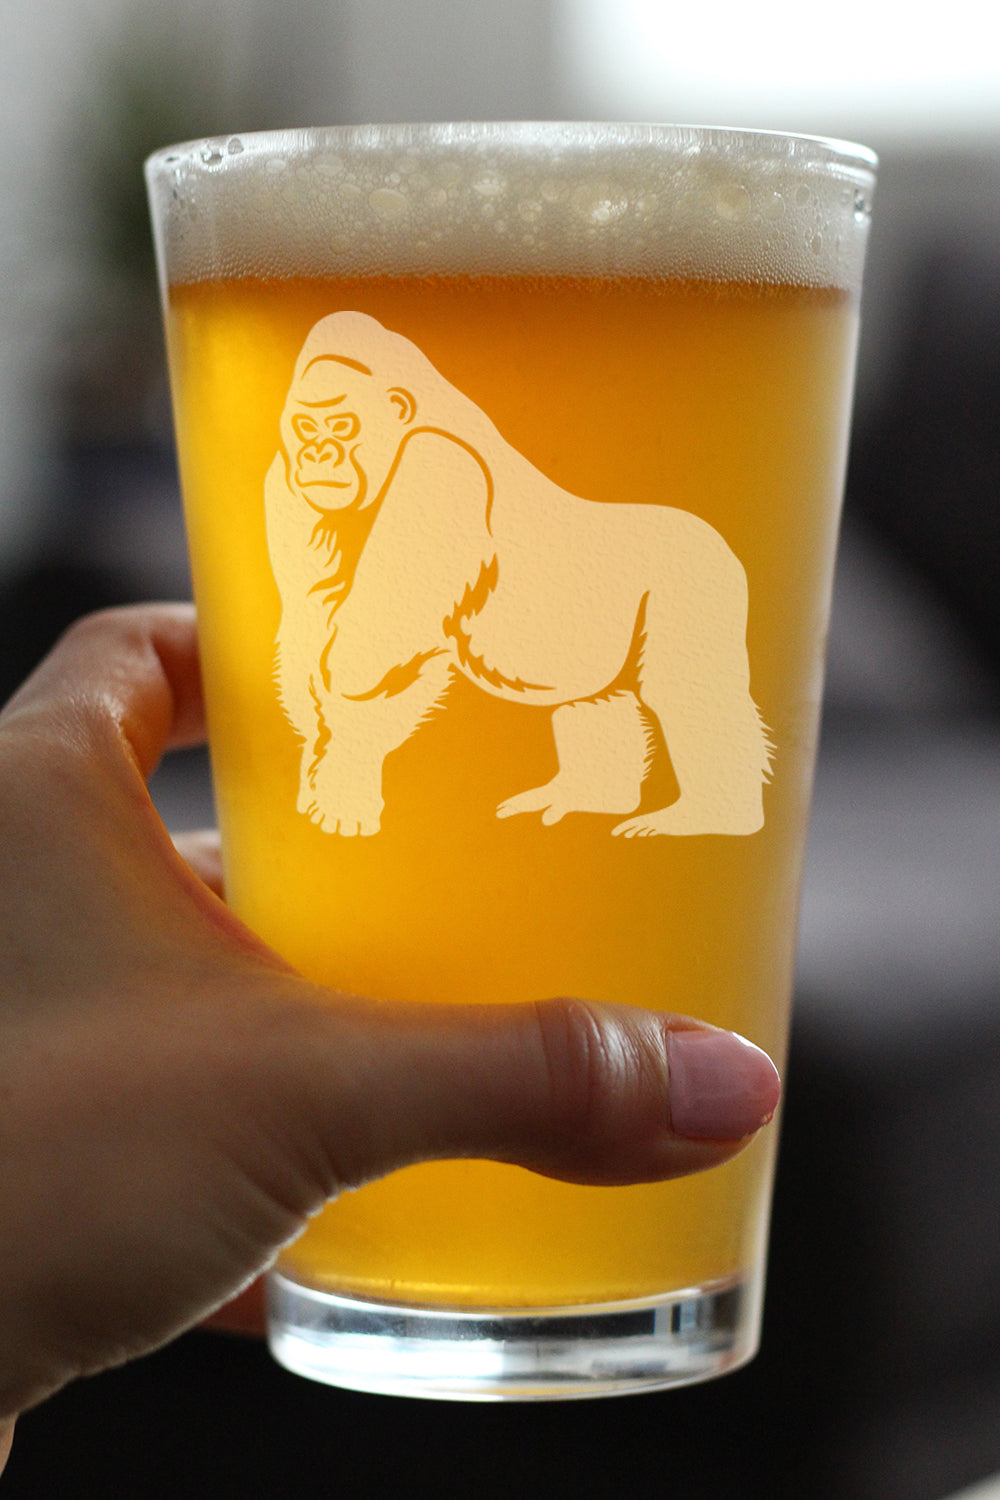 Gorilla Pint Glass for Beer - Fun Wild Animal Themed Decor and Gifts for Lovers of Apes and Monkeys - 16 Oz Glasses